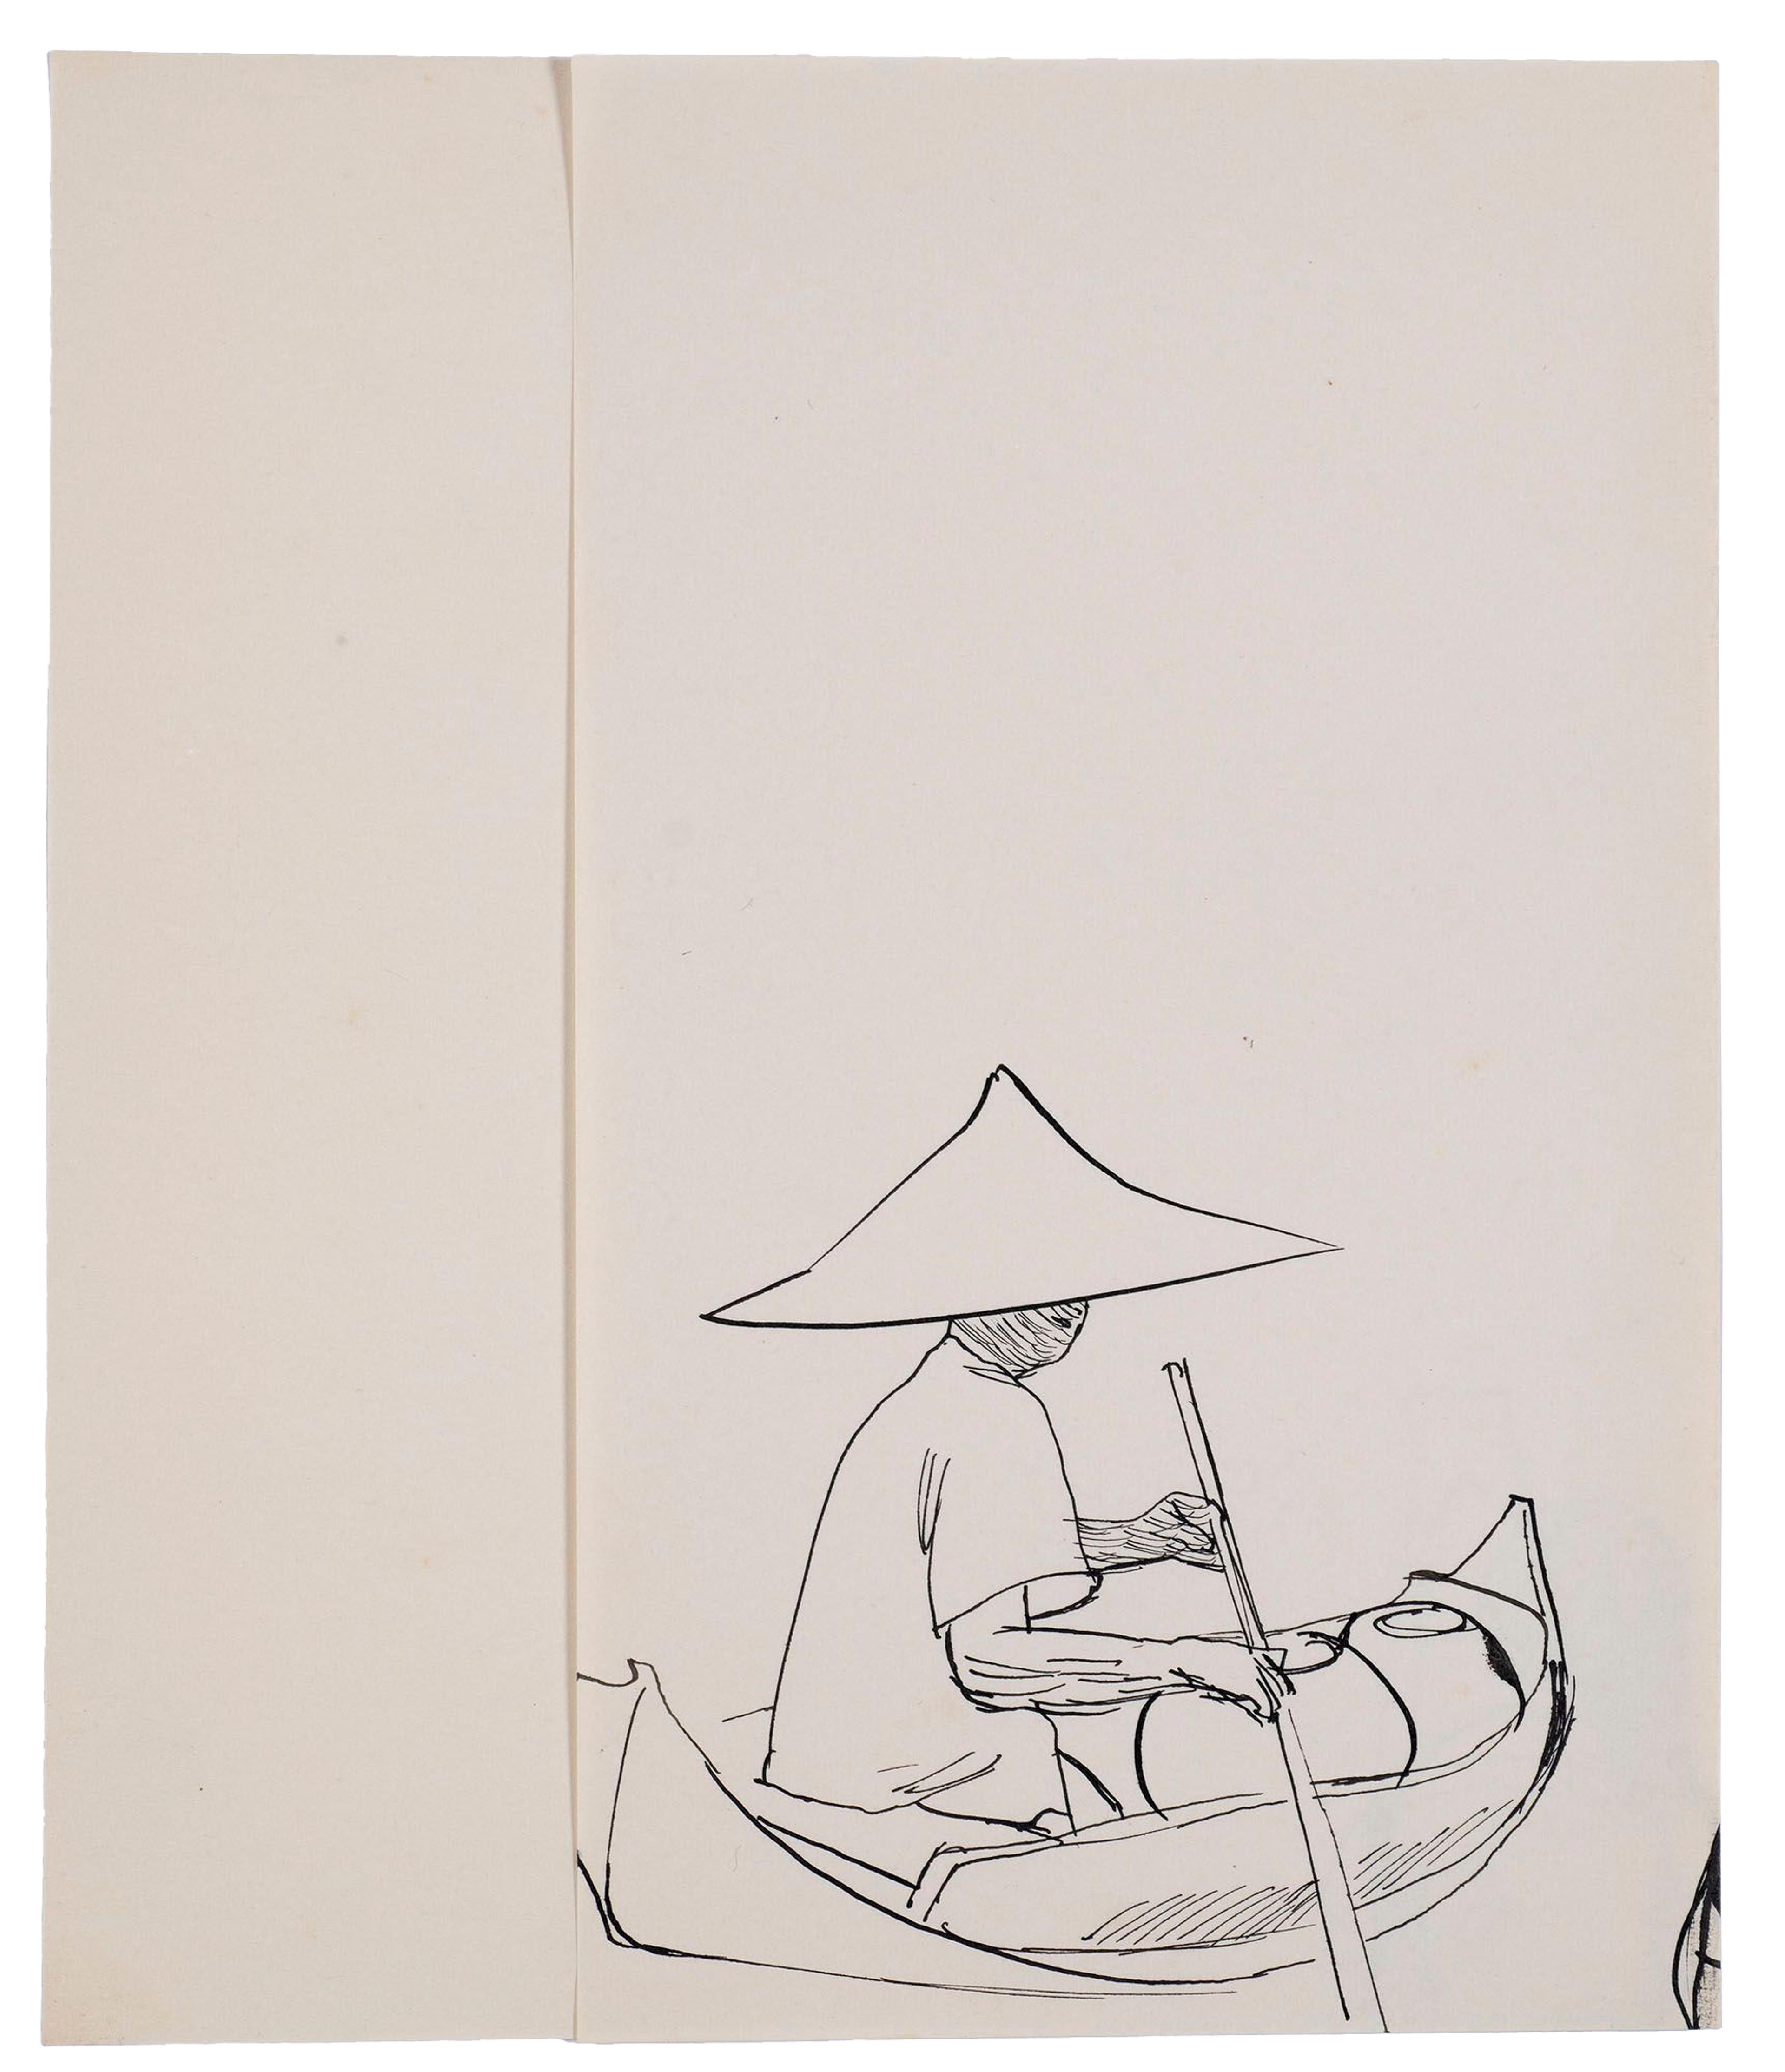 black ink drawing on white paper of a person in a canoe holding a paddle and wearing a hat